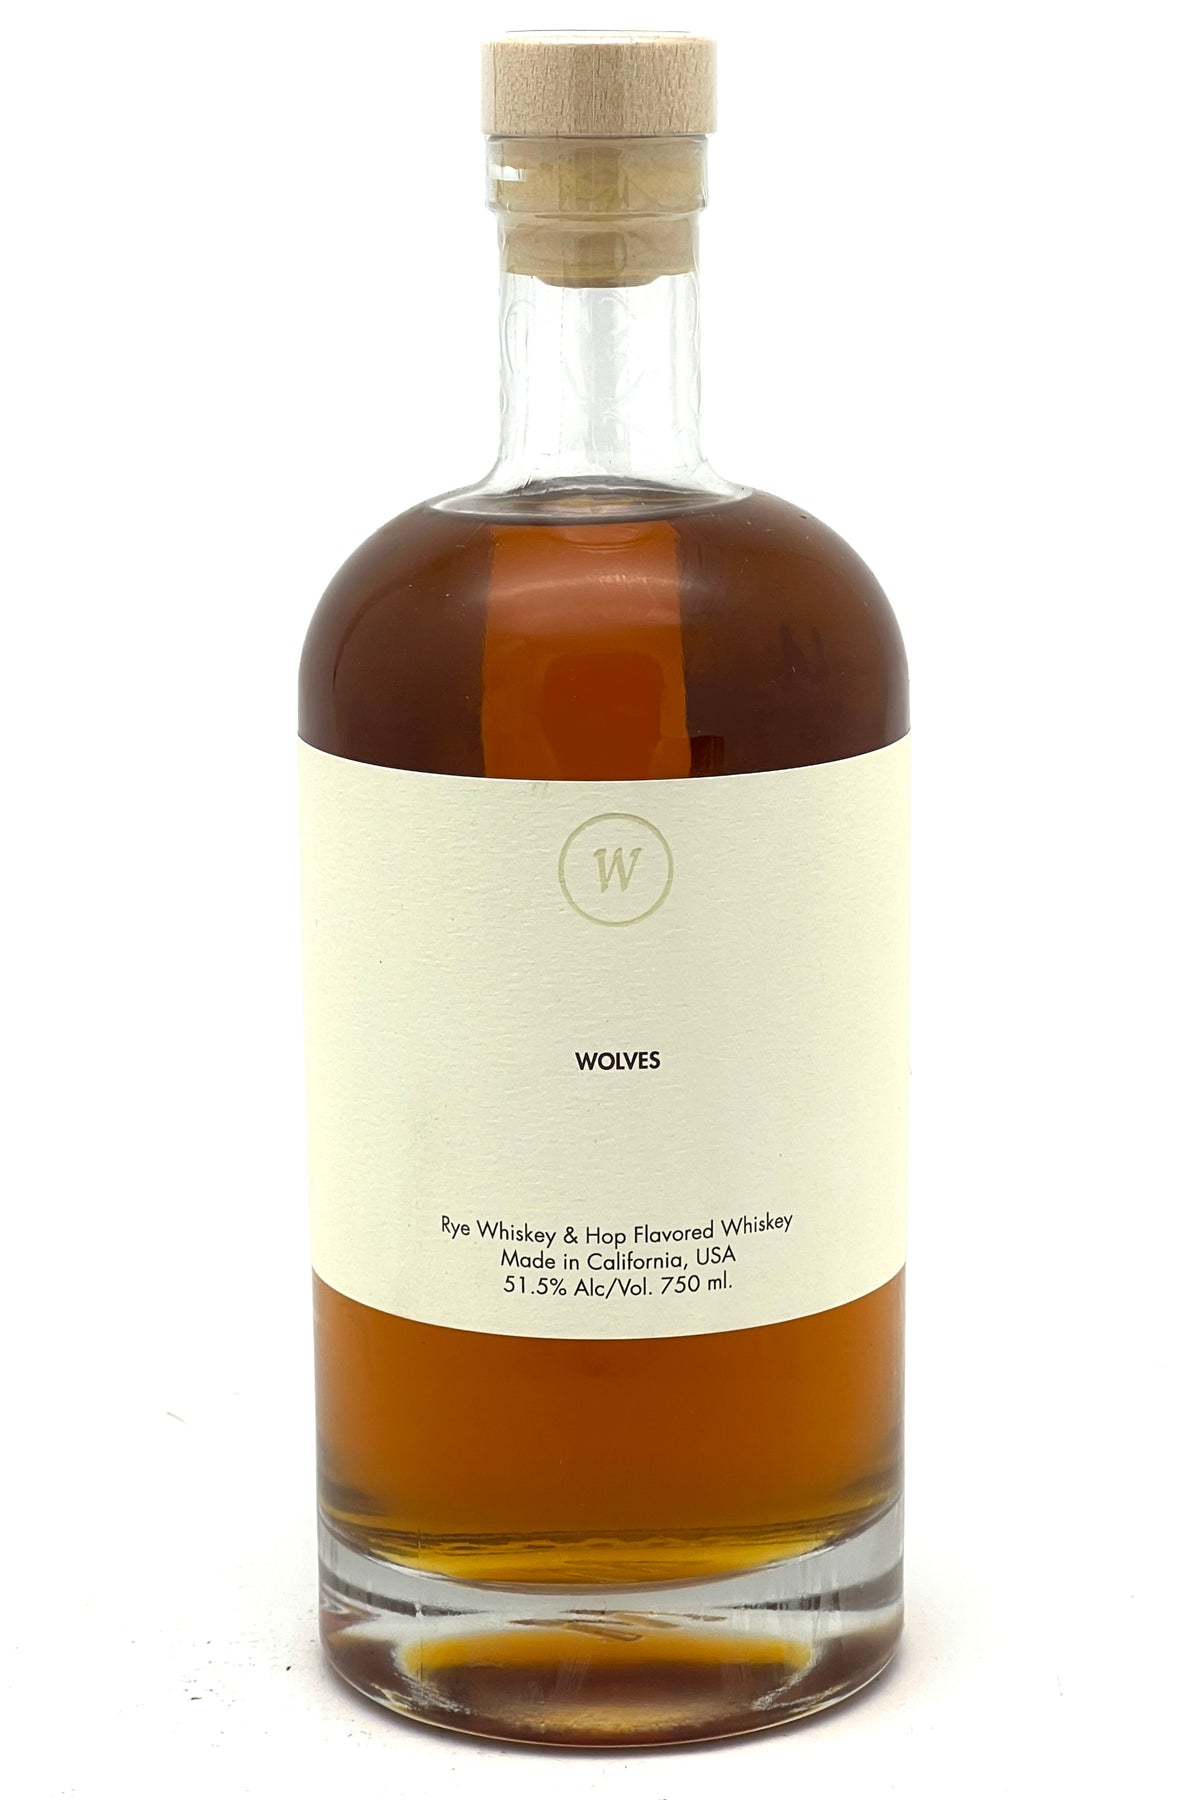 The Wolves Rye &amp; Hop Flavored Whiskey